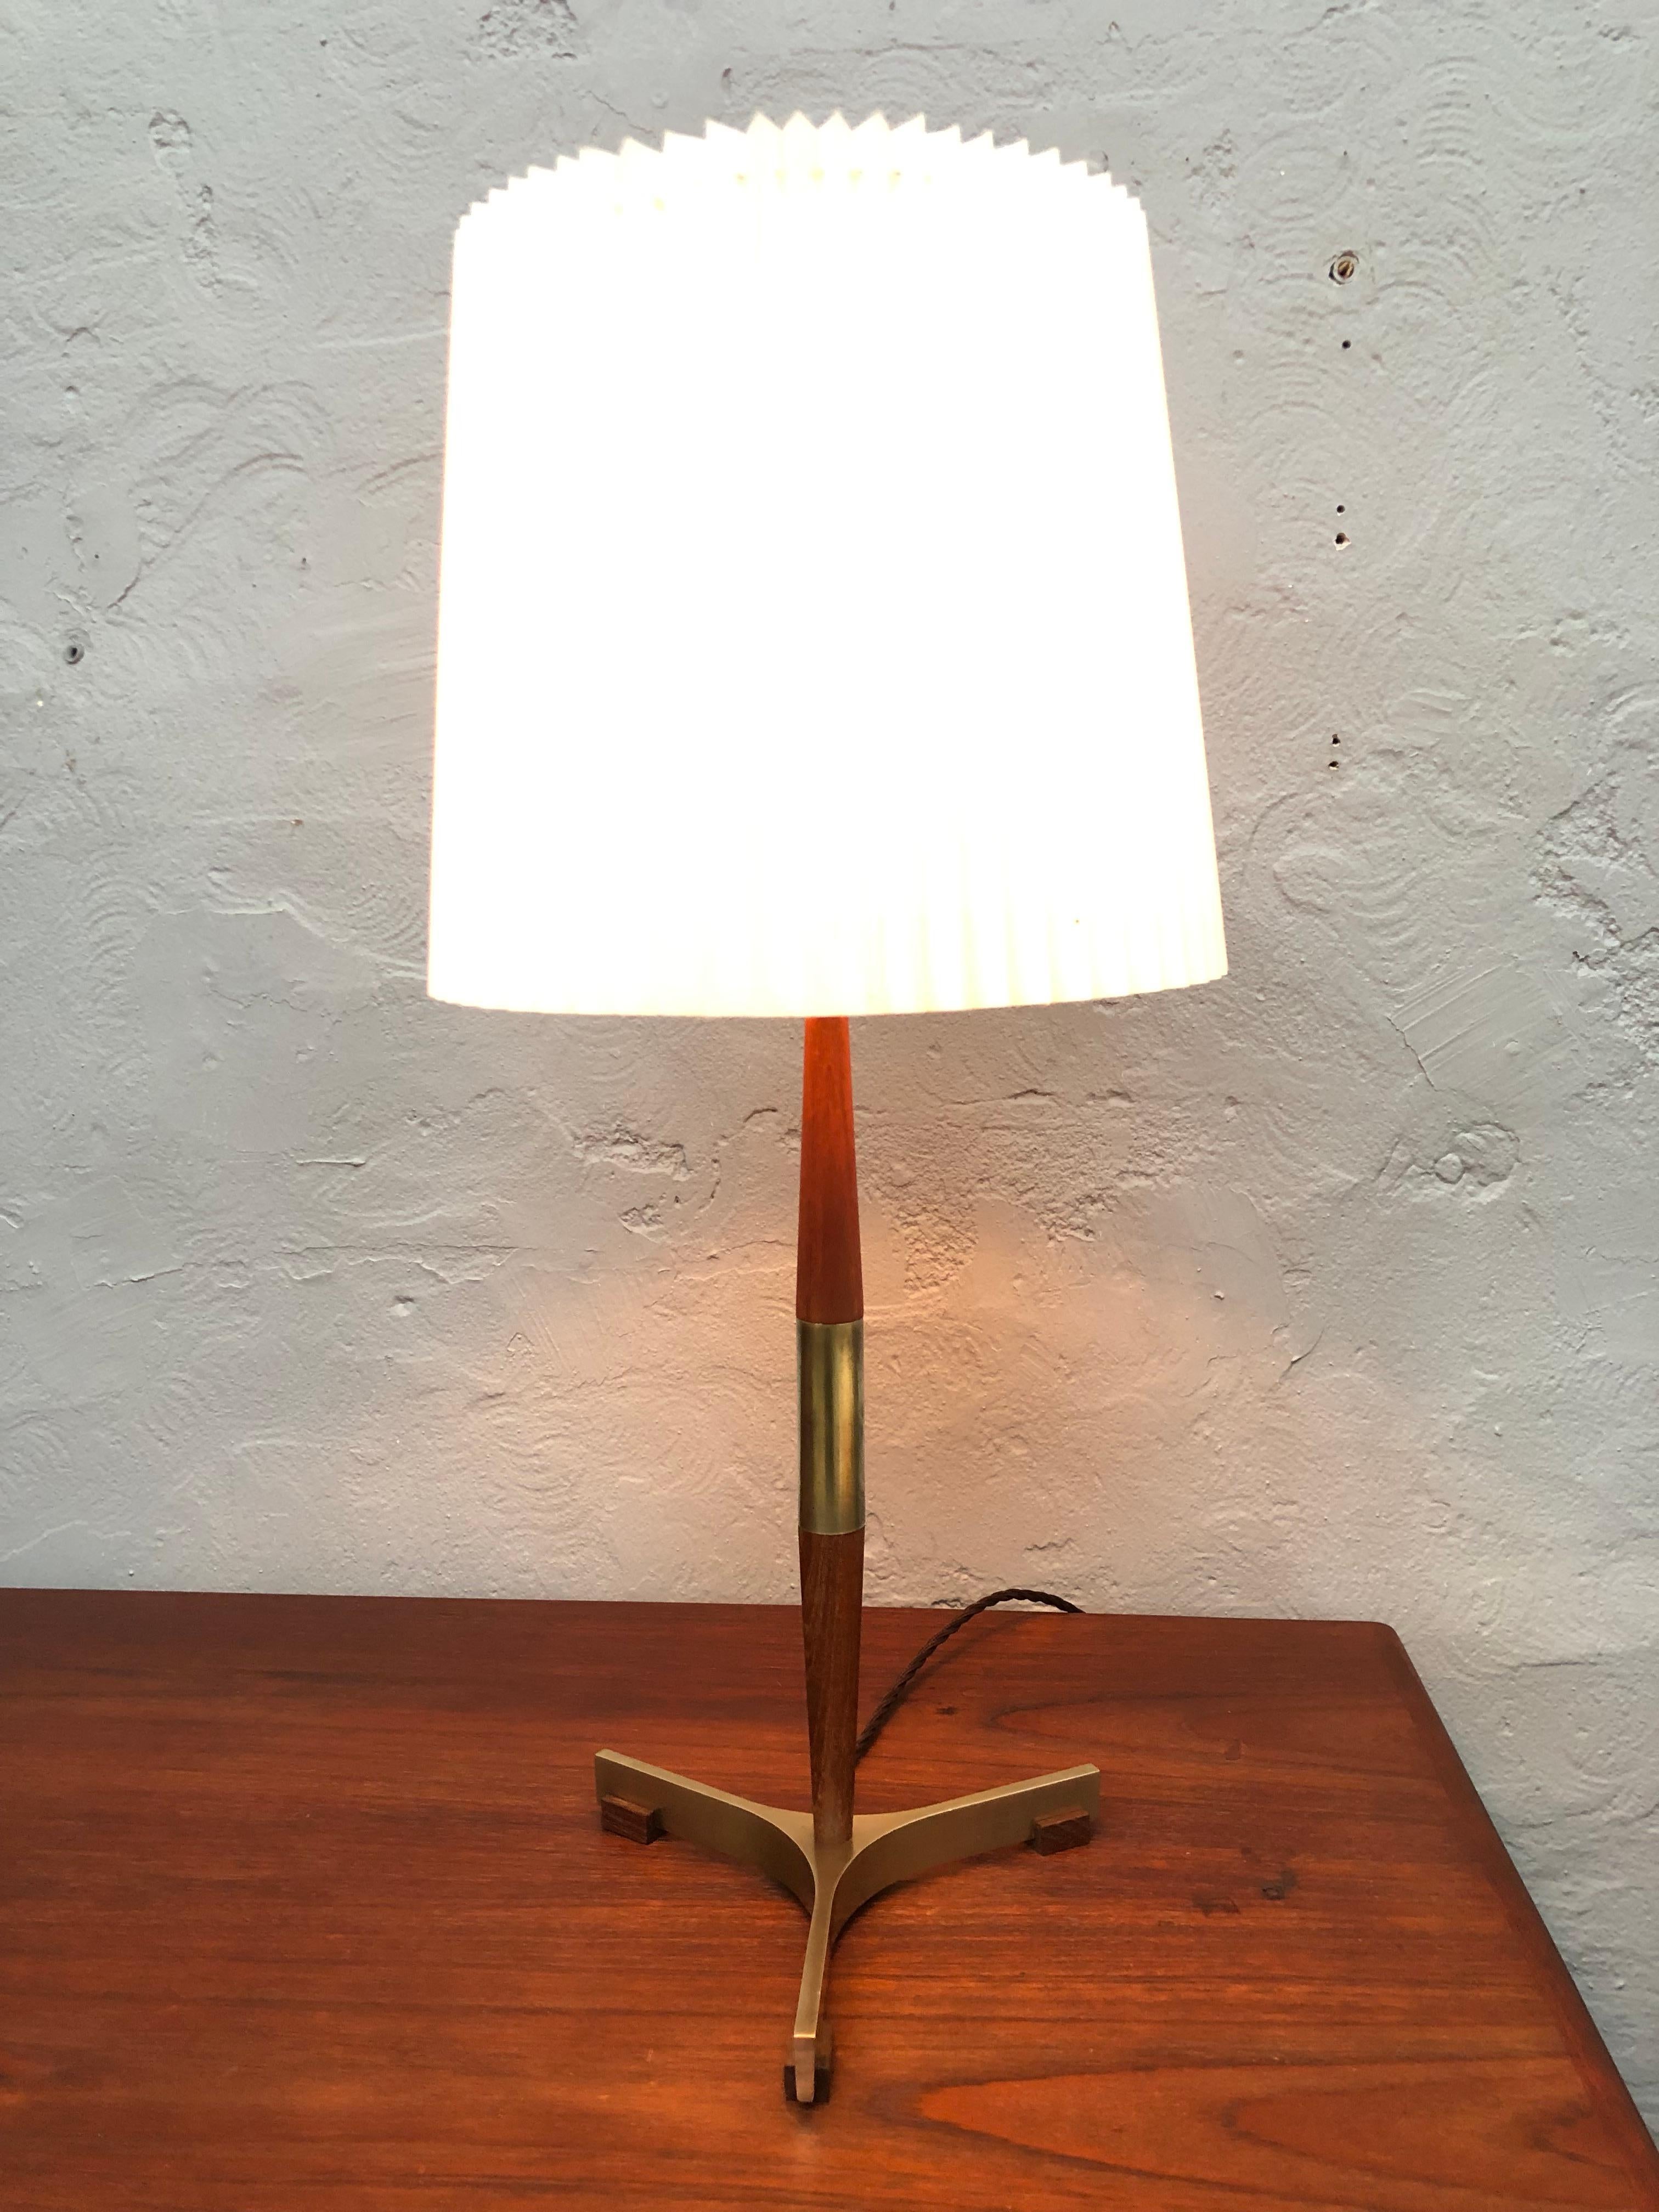 Iconic Danish Jo Hammerborg president table lamp for Fog & Mørup in brass and teak.
Three legged solid brass base with teak feet.
Turned stem in solid teak and brass.
Rewired with a brown twisted cloth flex and grounded.
Maintains its original